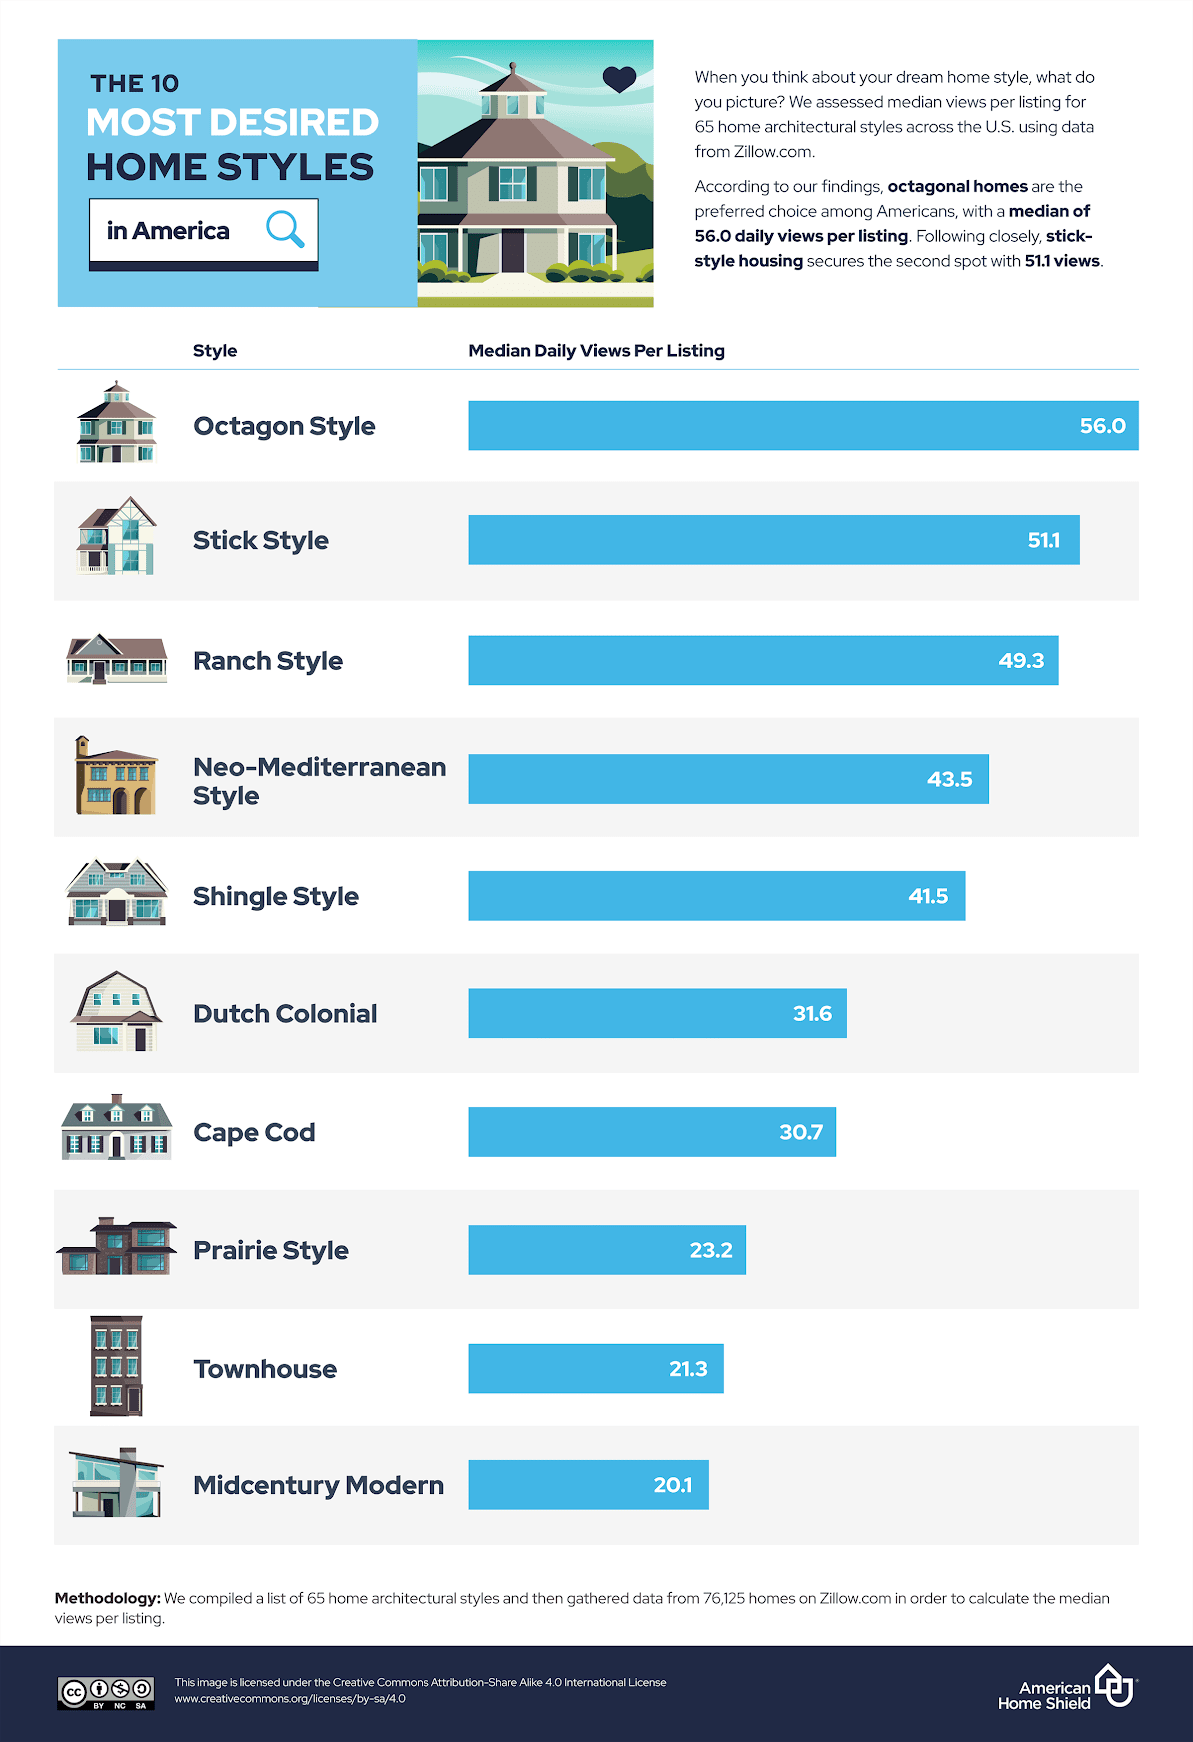 Most desired home styles overall